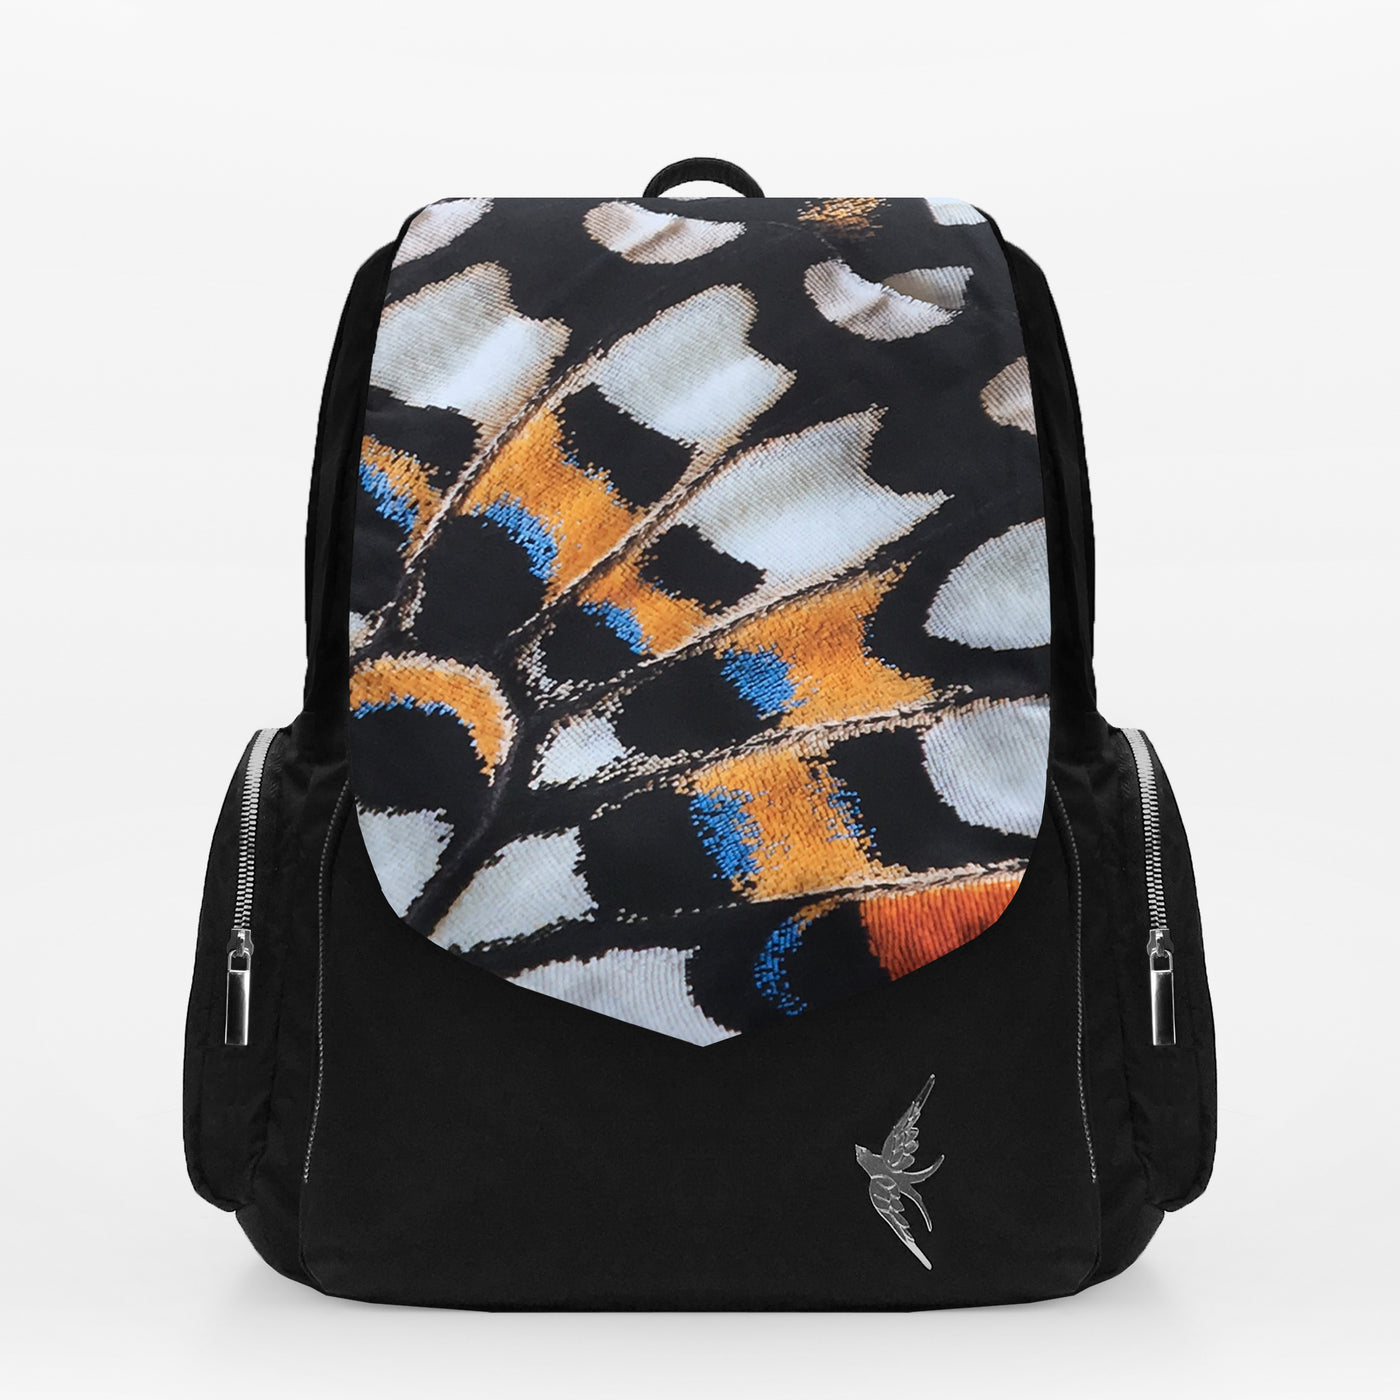 Laptop Backpack with the Pop Butterfly Print